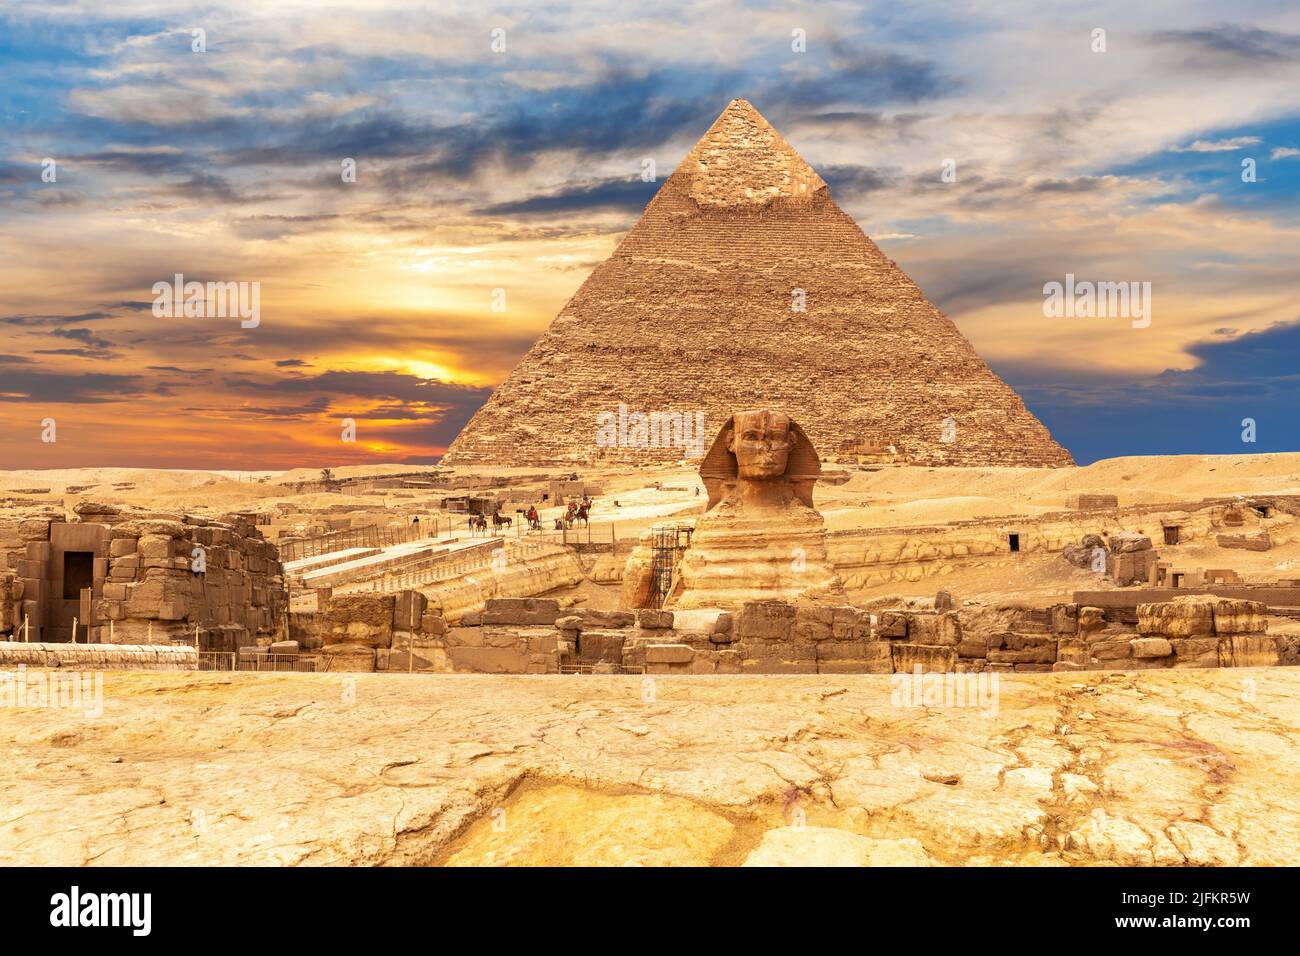 The Great Sphinx and the Pyramid of Chephren at sunset, Giza, Egypt. Stock Photo